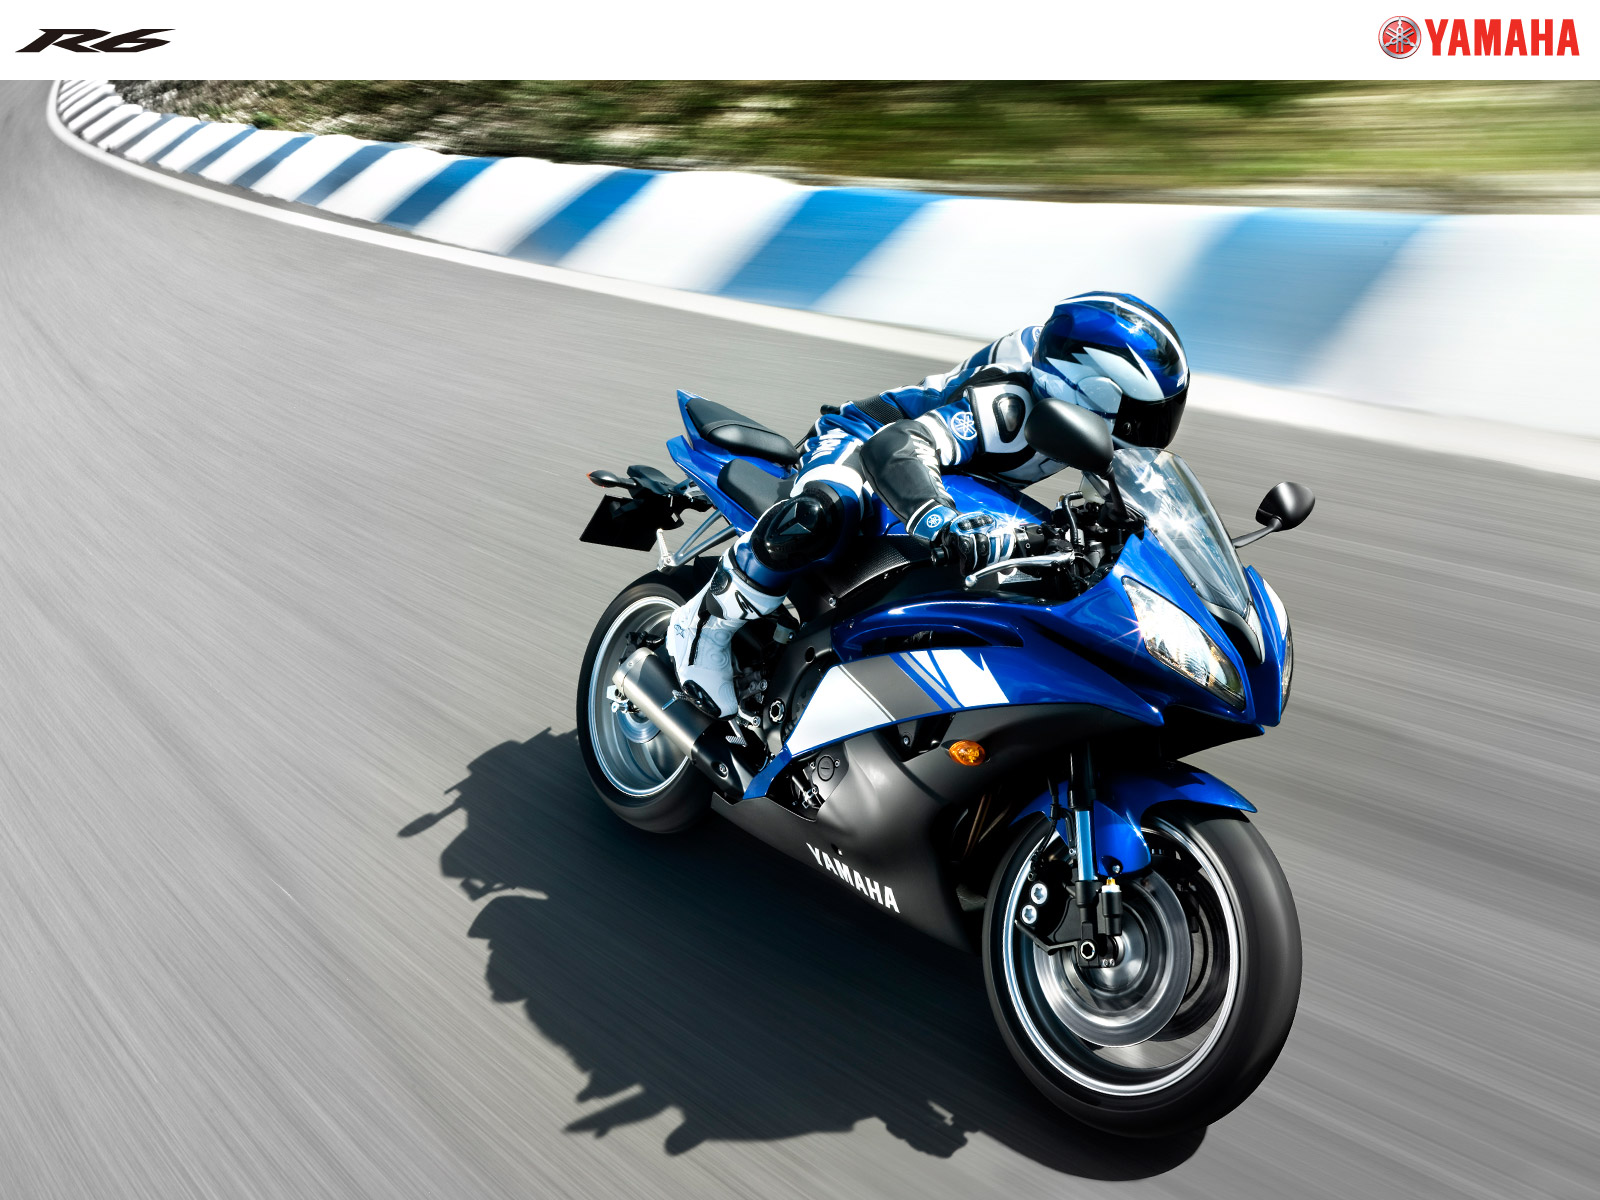 HD Yamaha Wallpaper amp Background Images For Download 1600x1200